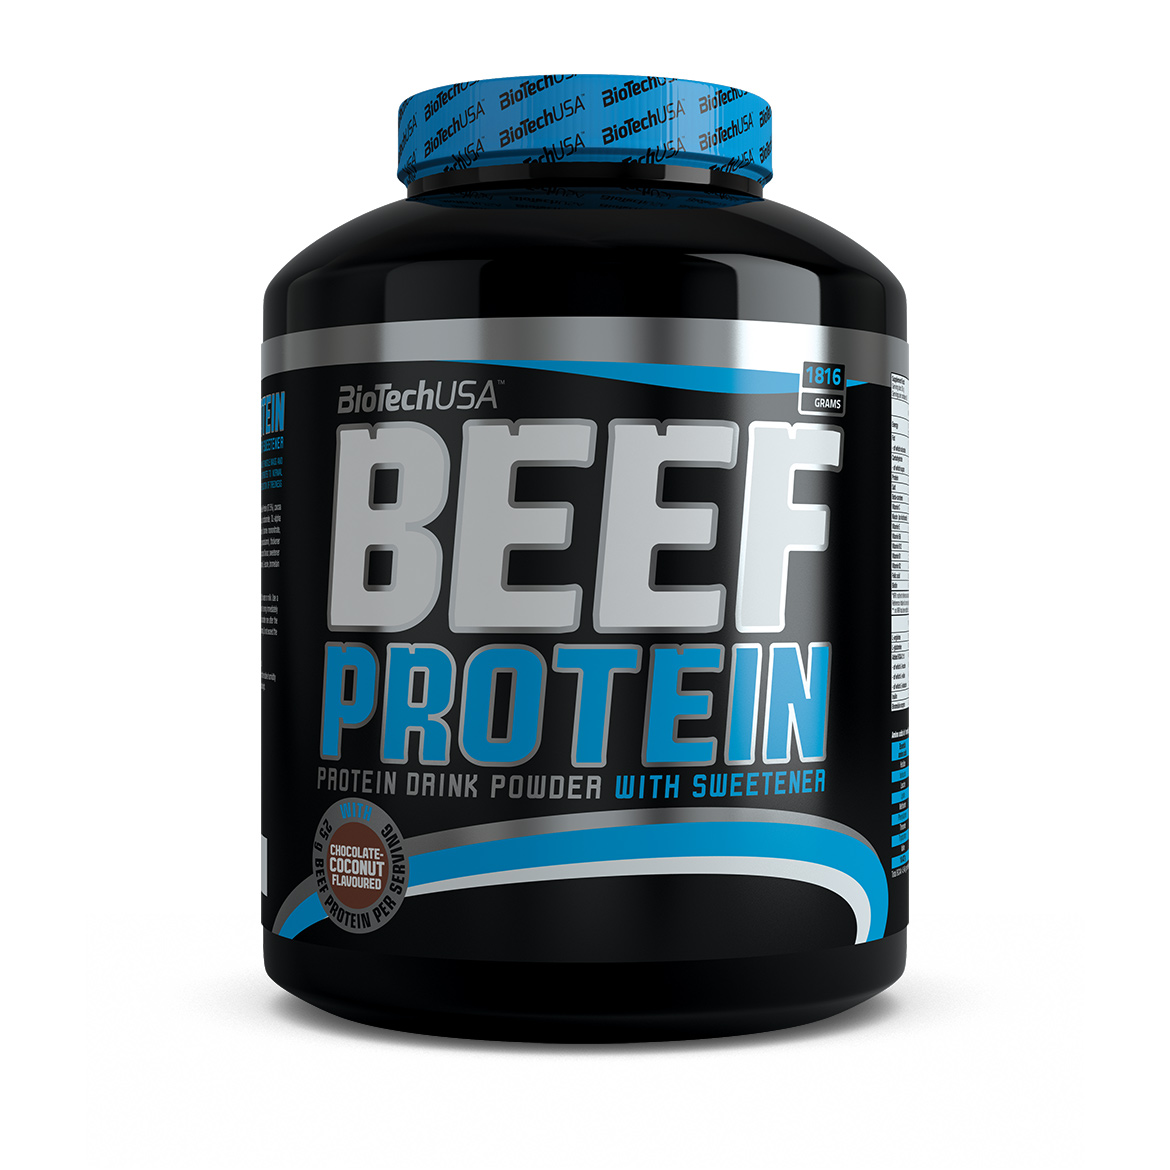 Biotech BEEF Protein